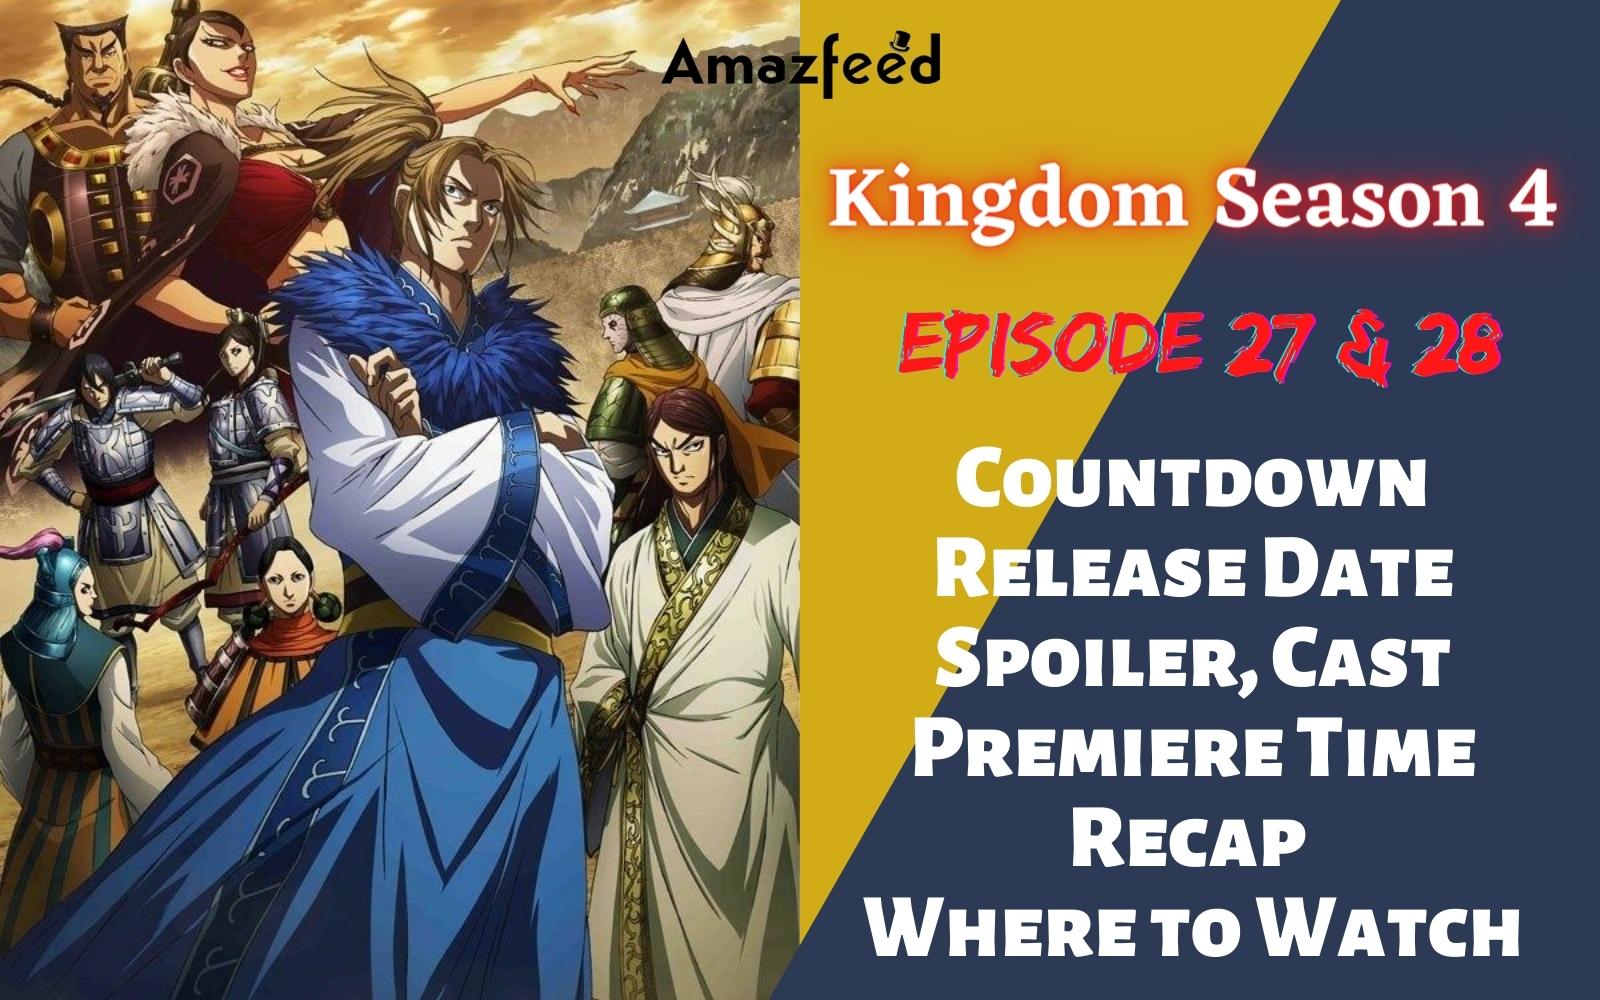 Is Kingdom Season 4 Episode 27 & 28 Coming or Not? Is Kingdom Season 4 Ended? Know more about Kingdom Season 4